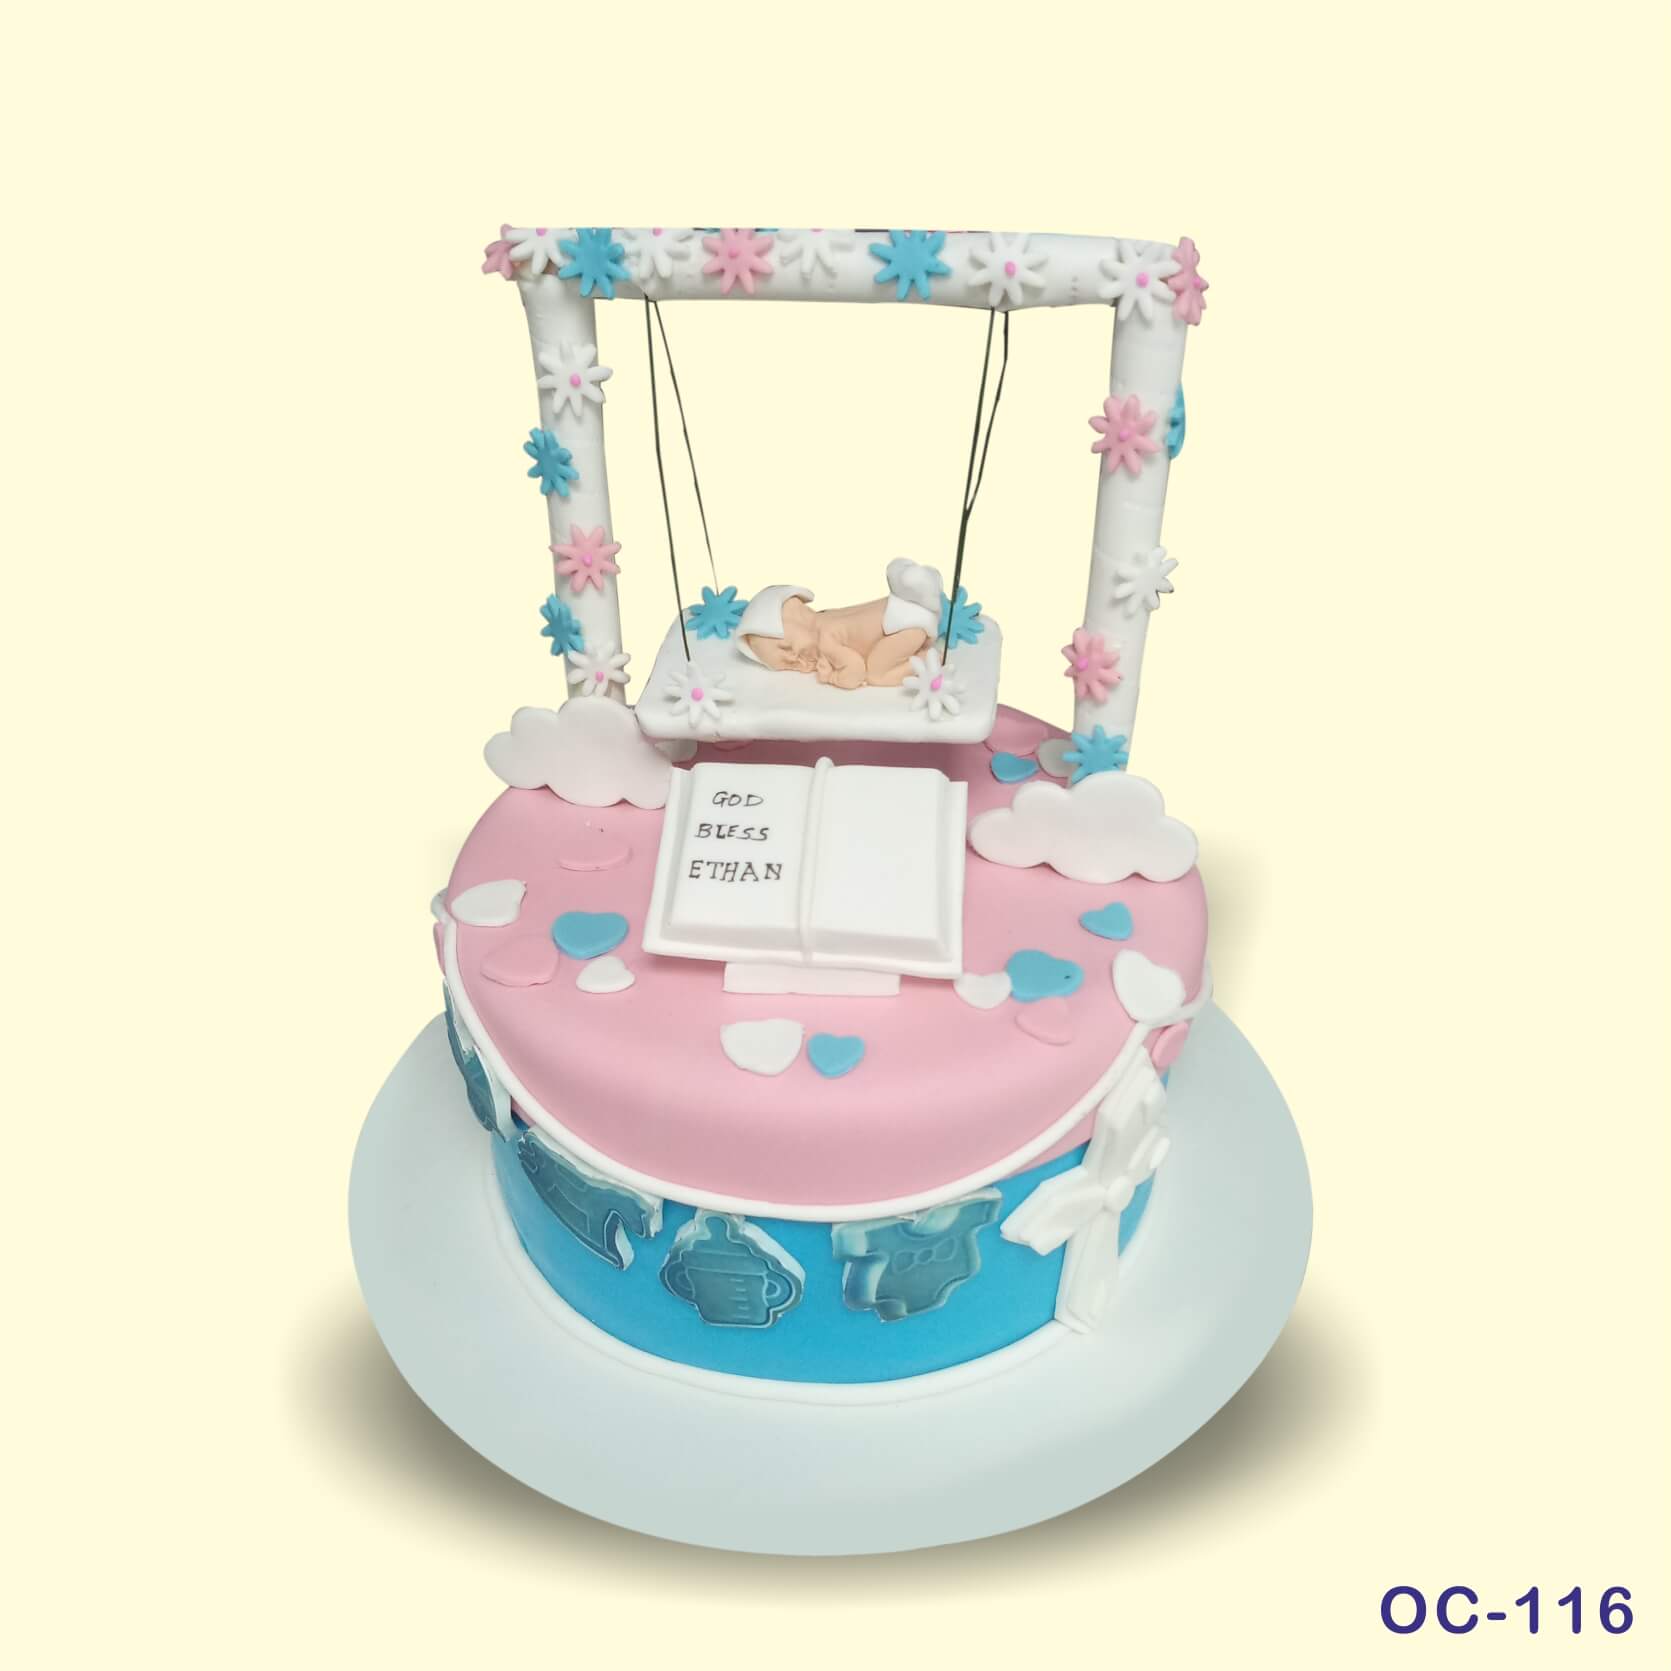 Best Baby Shower Cakes delivery | Order Baby Shower Cakes Online - Just Bake